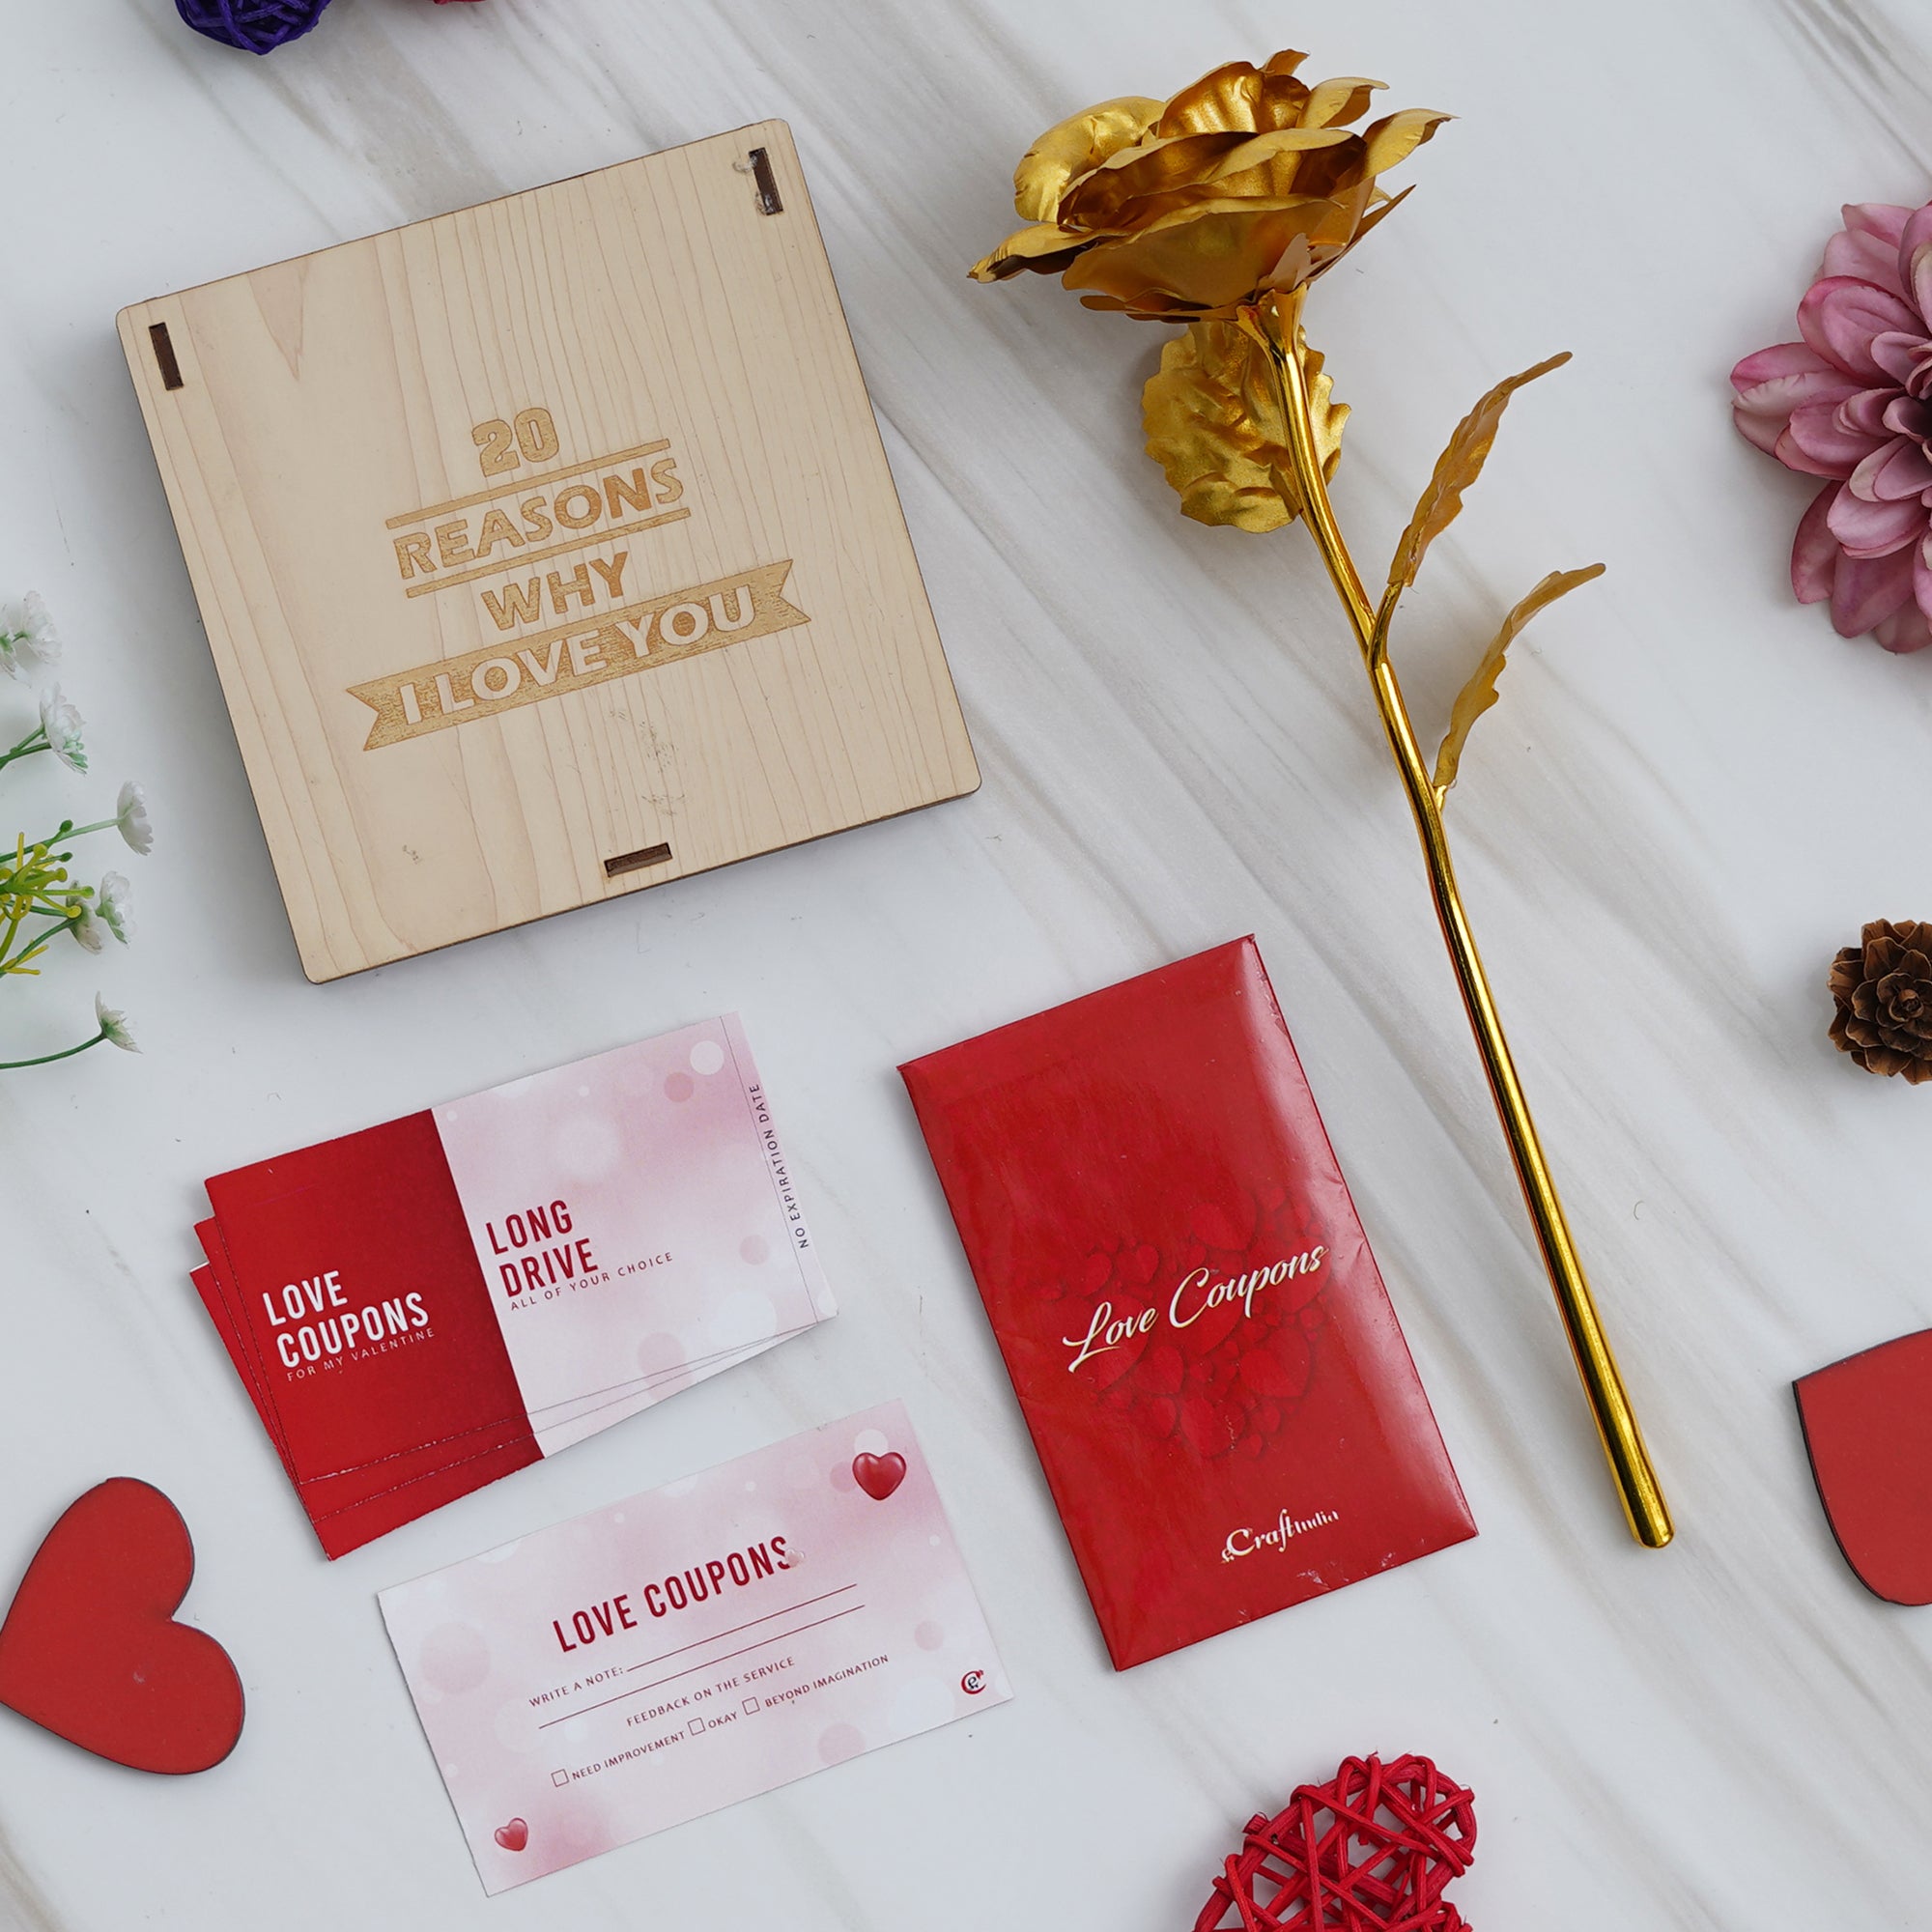 Valentine Combo of Pack of 12 Love Coupons Gift Cards Set, Golden Rose Gift Set, "20 Reasons Why I Love You" Printed on Little Hearts Wooden Gift Set